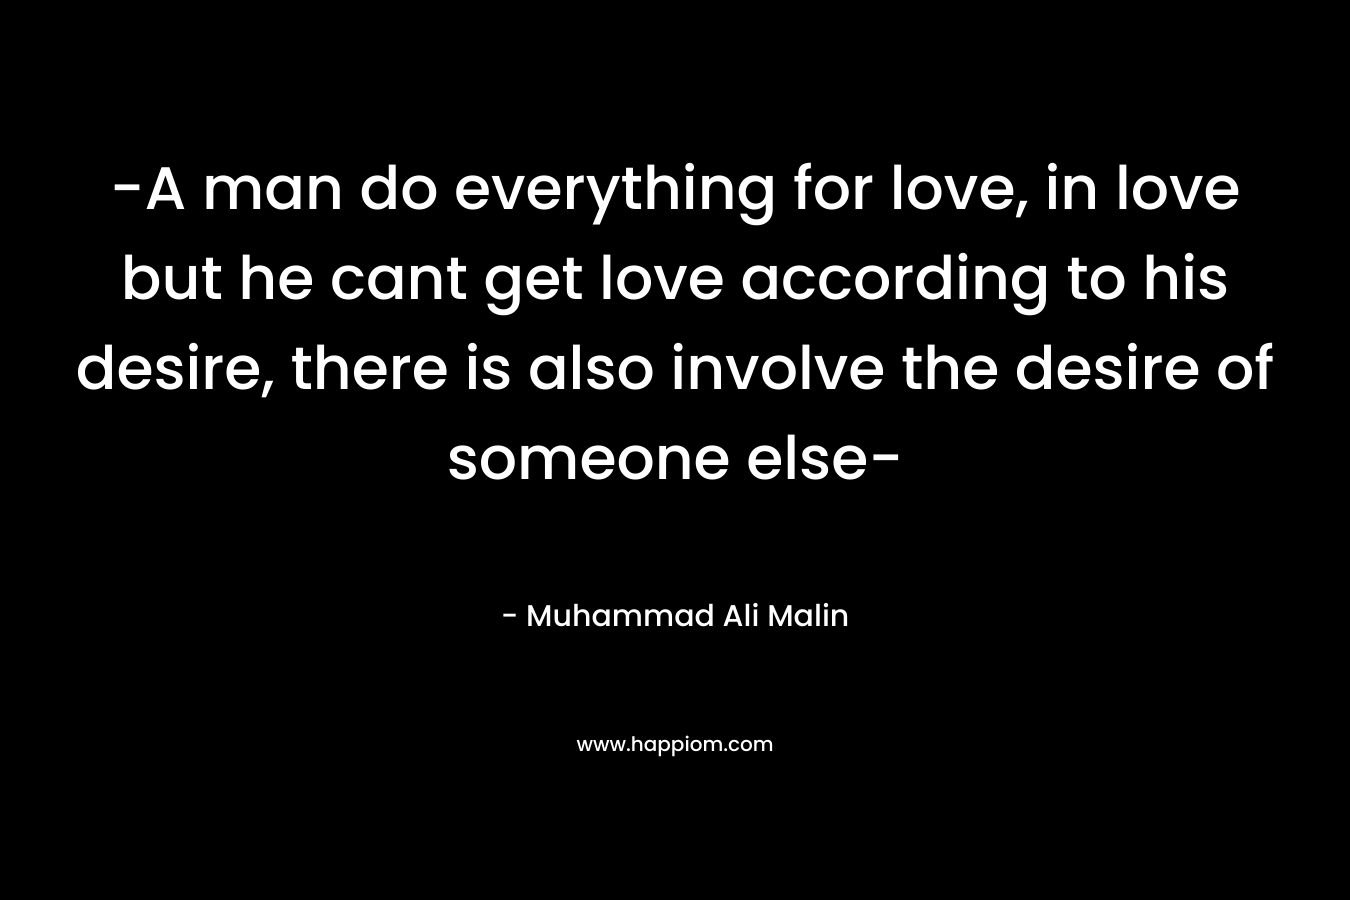 -A man do everything for love, in love but he cant get love according to his desire, there is also involve the desire of someone else-